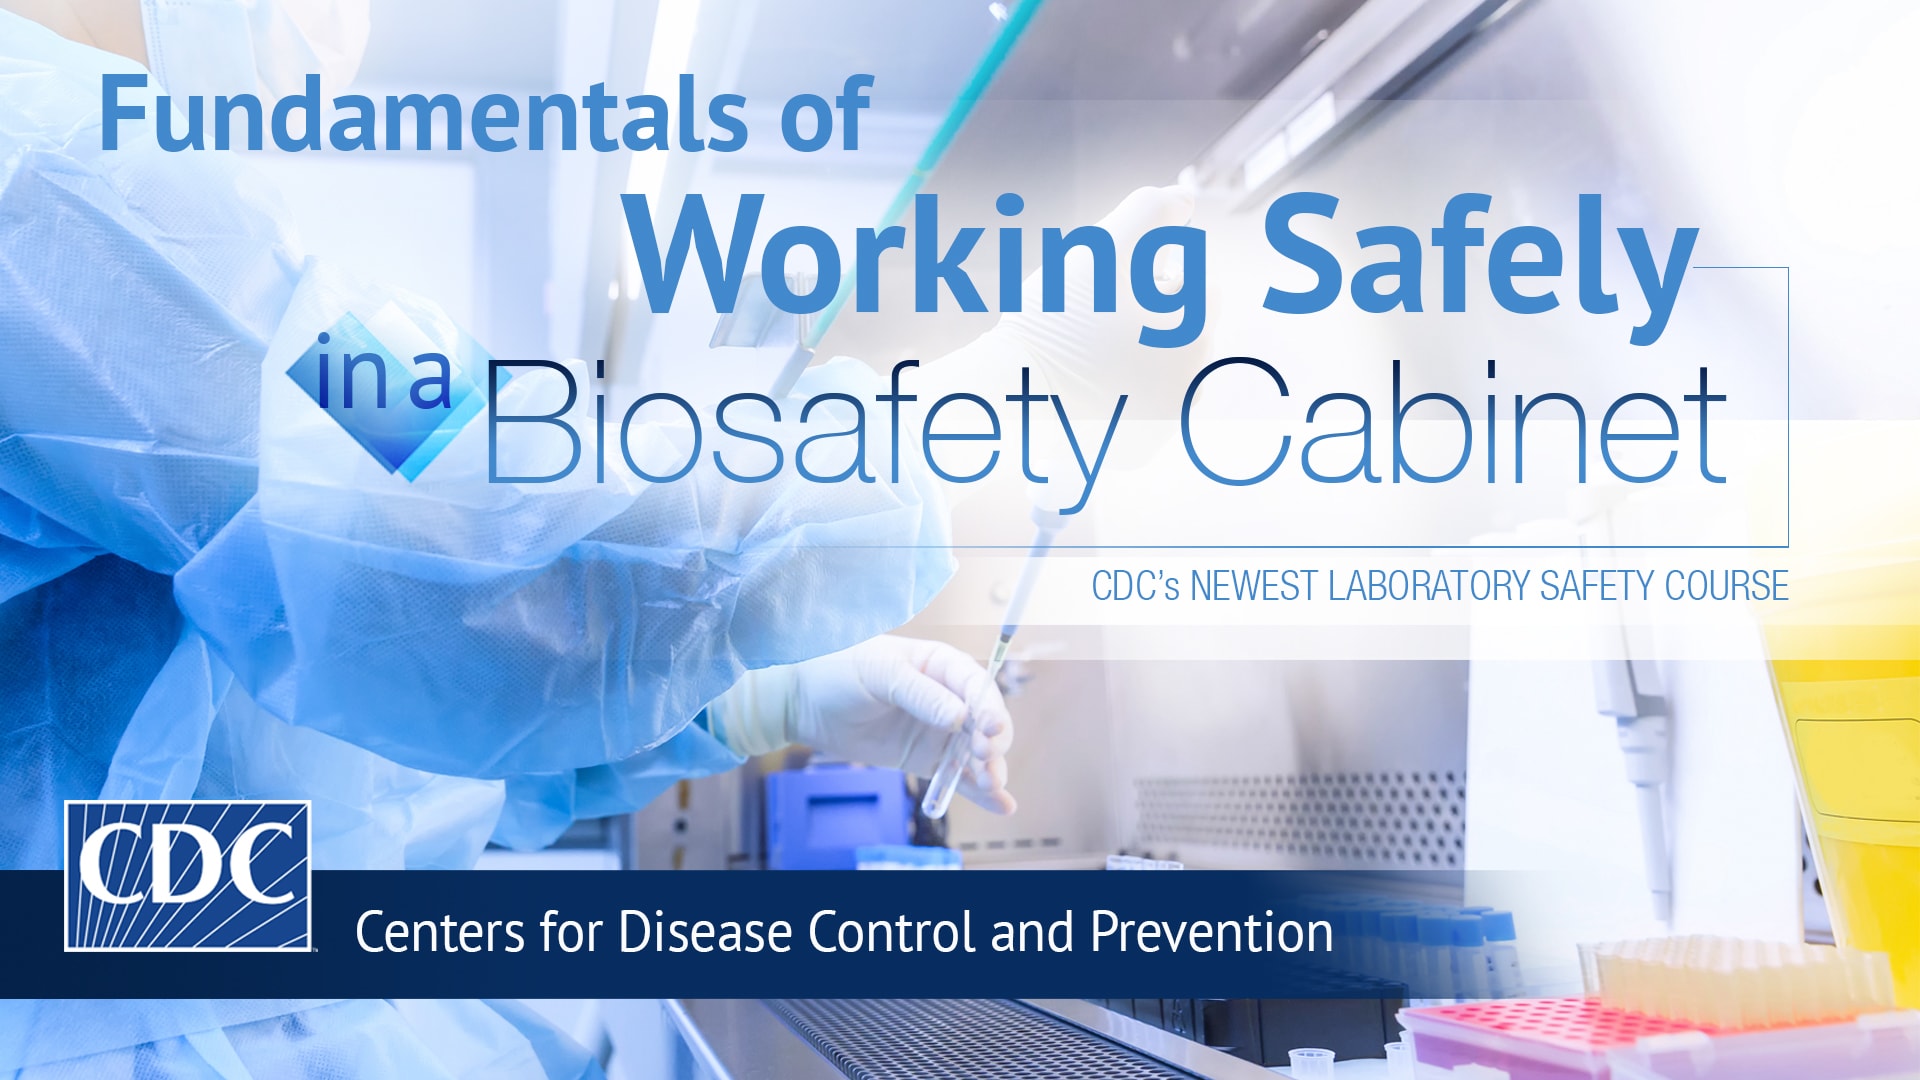 Fundamentals of Working Safely in a Biosafety Cabinet